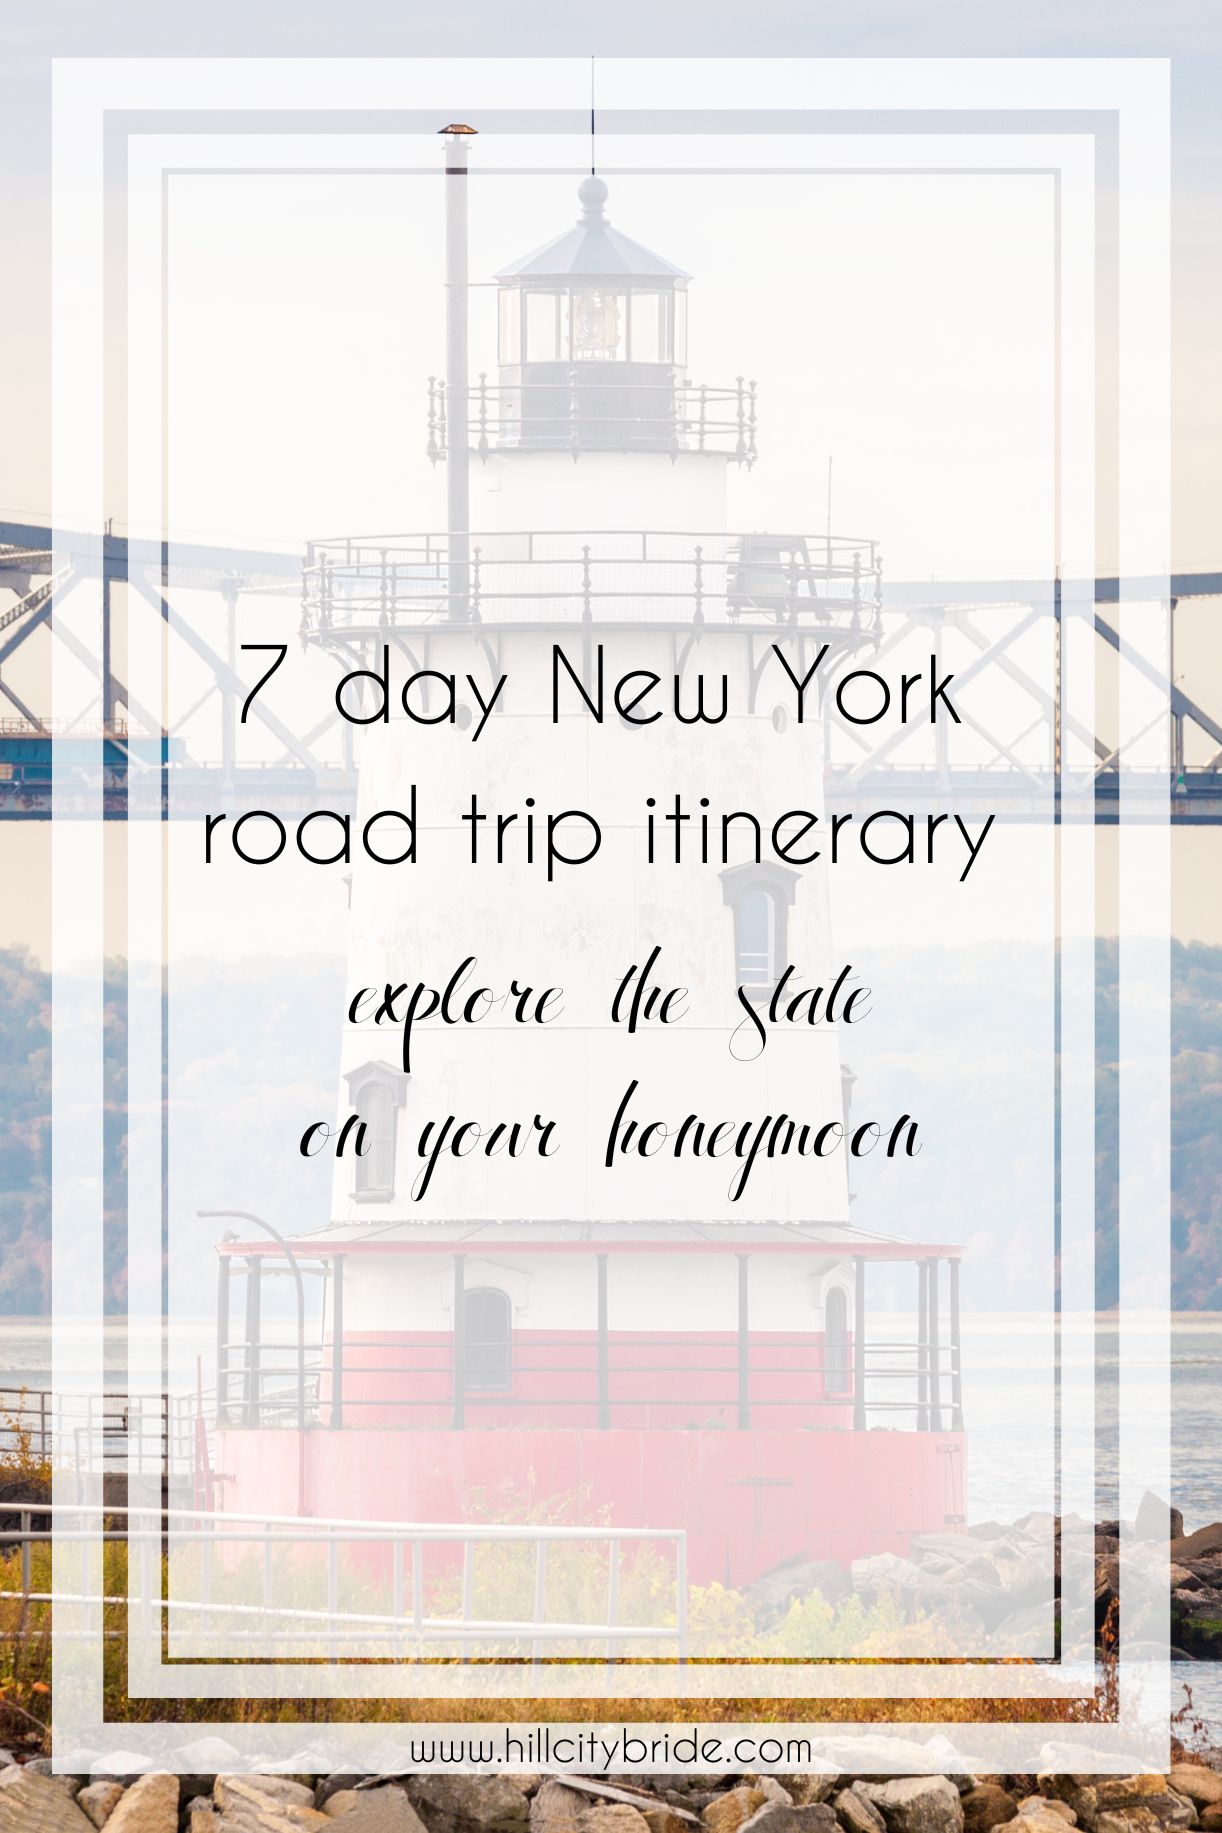 Have an Amazing Honeymoon on Our New York Road Trip Itinerary